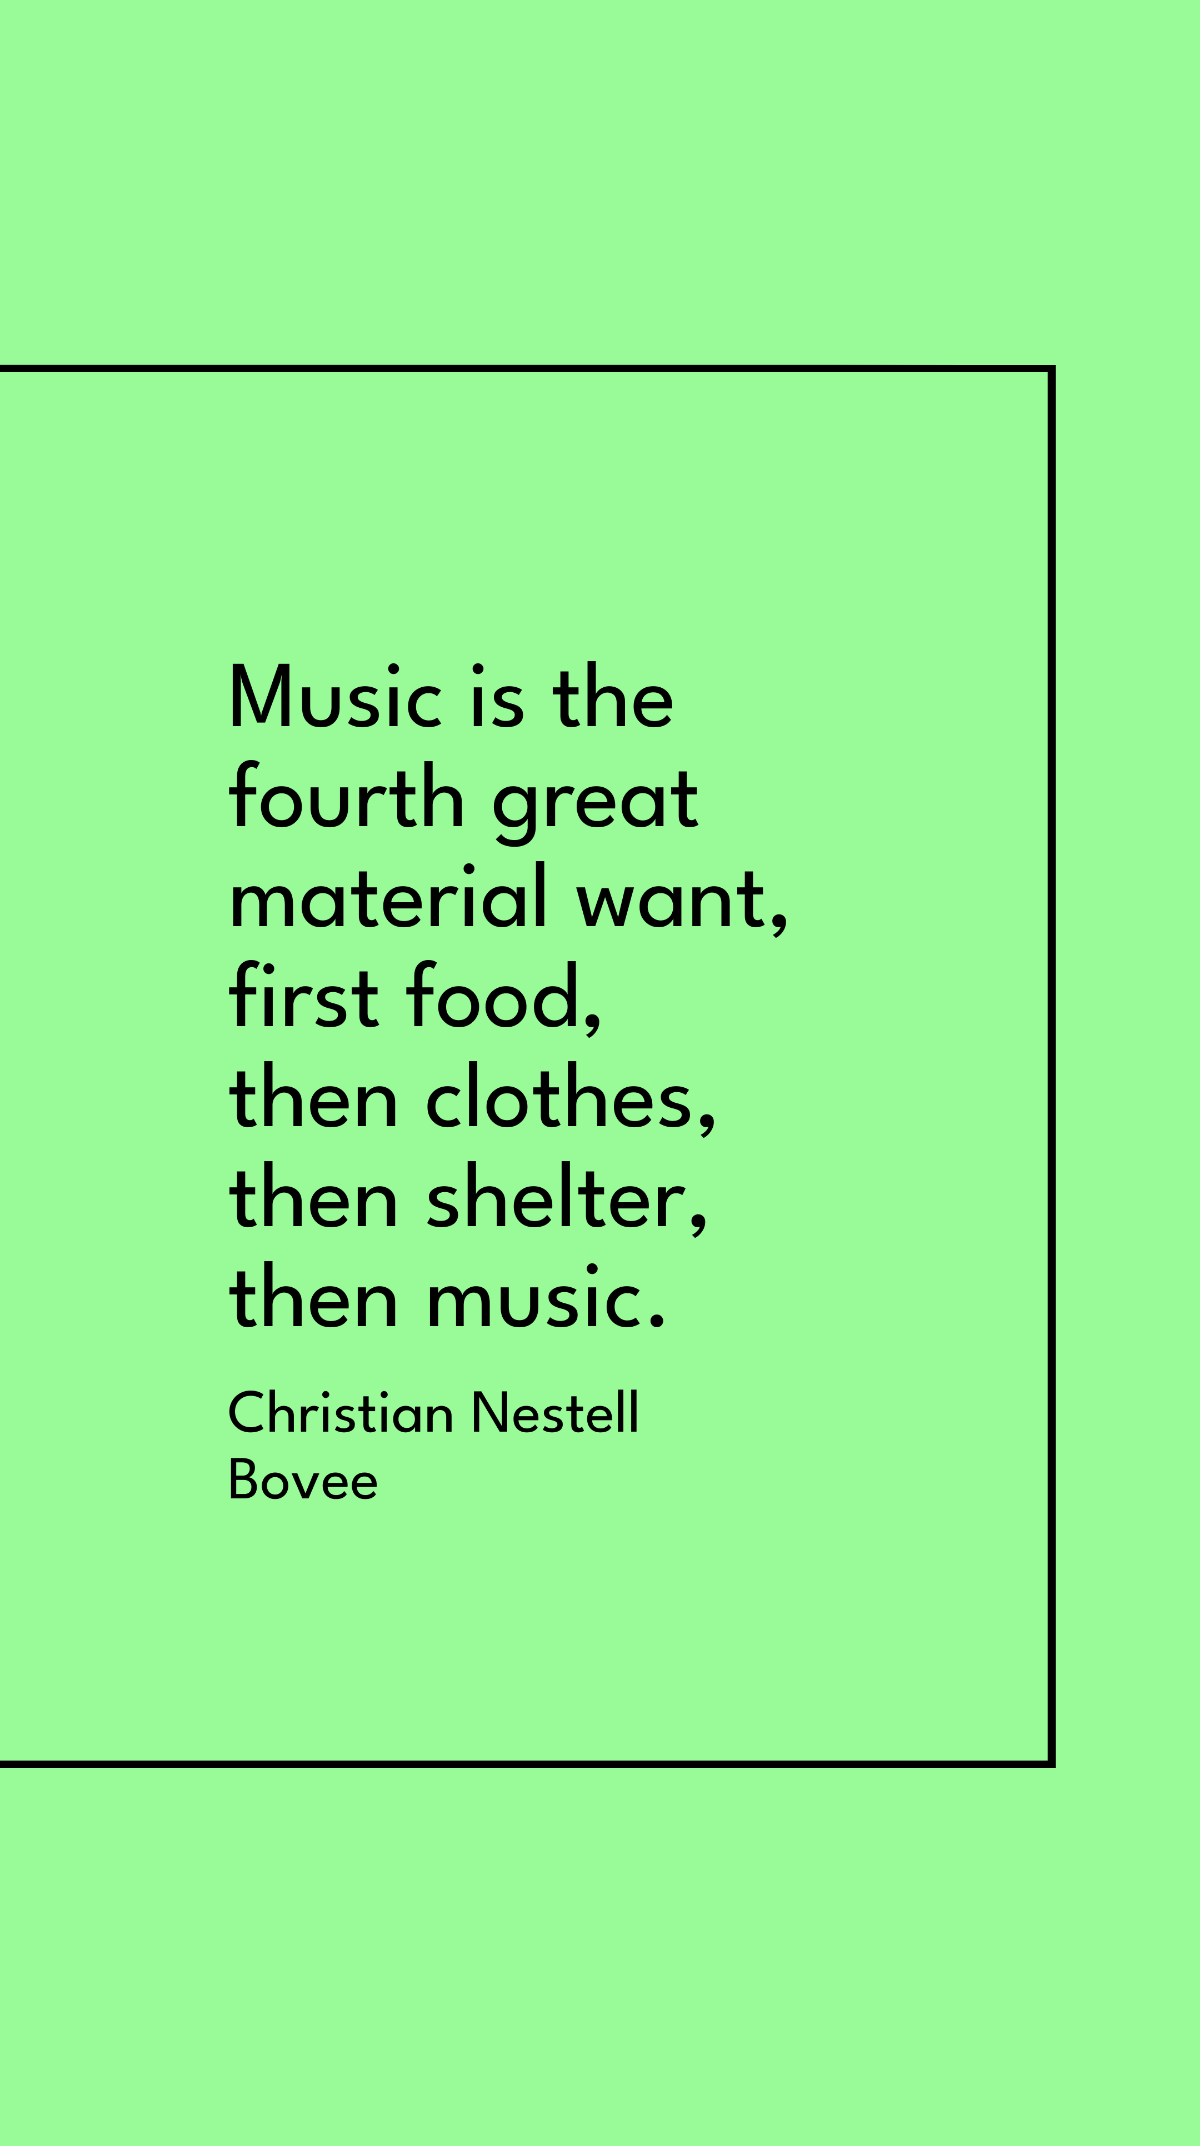 Christian Nestell Bovee - Music is the fourth great material want, first food, then clothes, then shelter, then music. Template